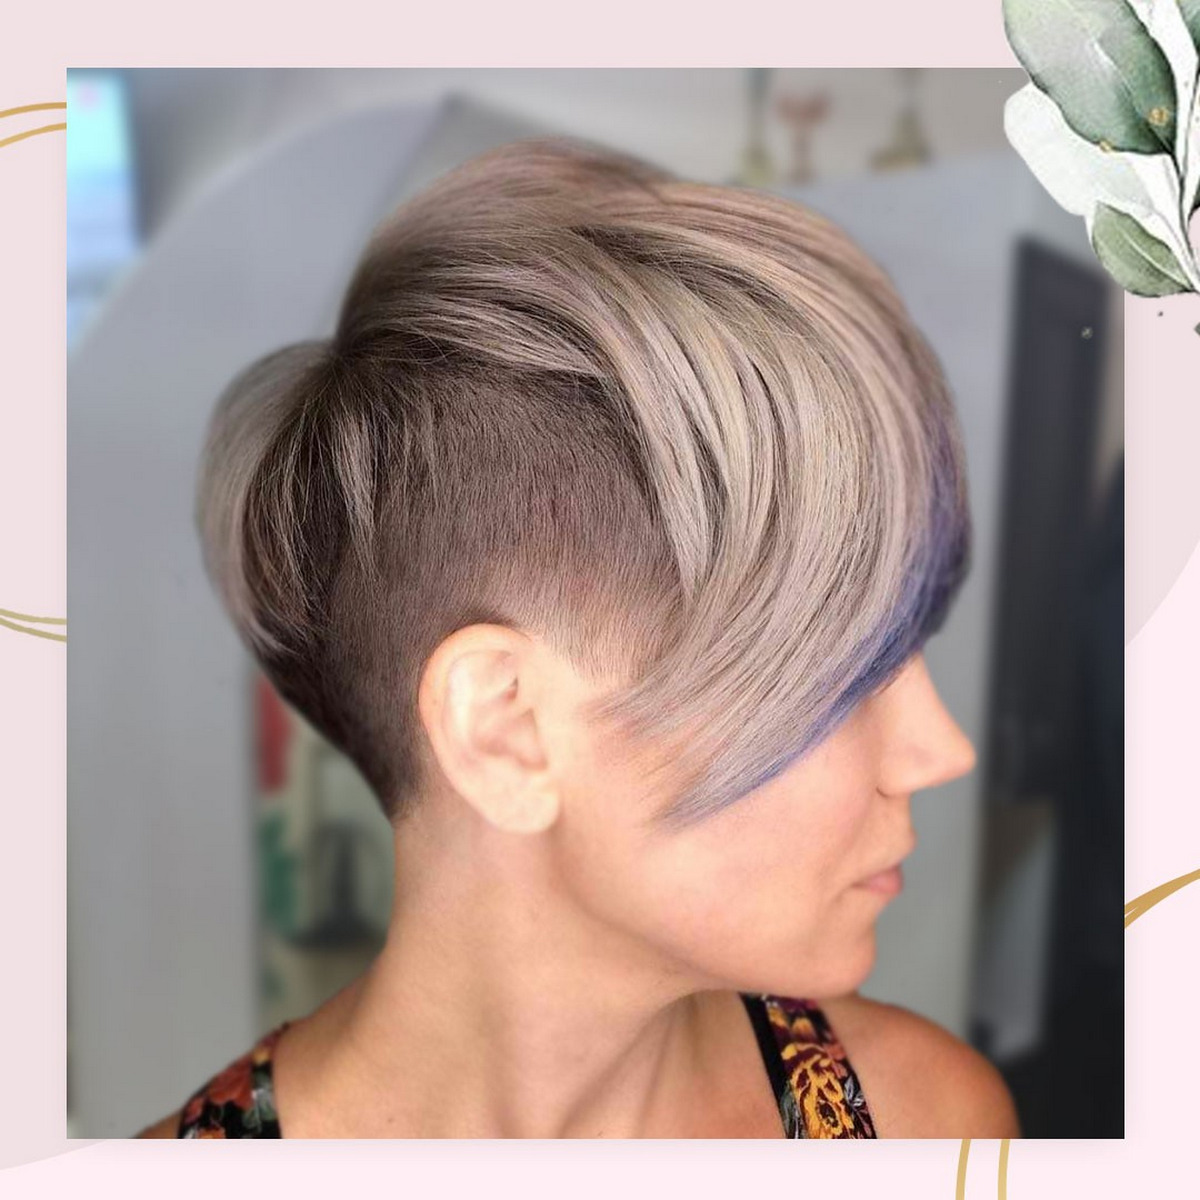 Short Textured Pixie with Choppy Bangs